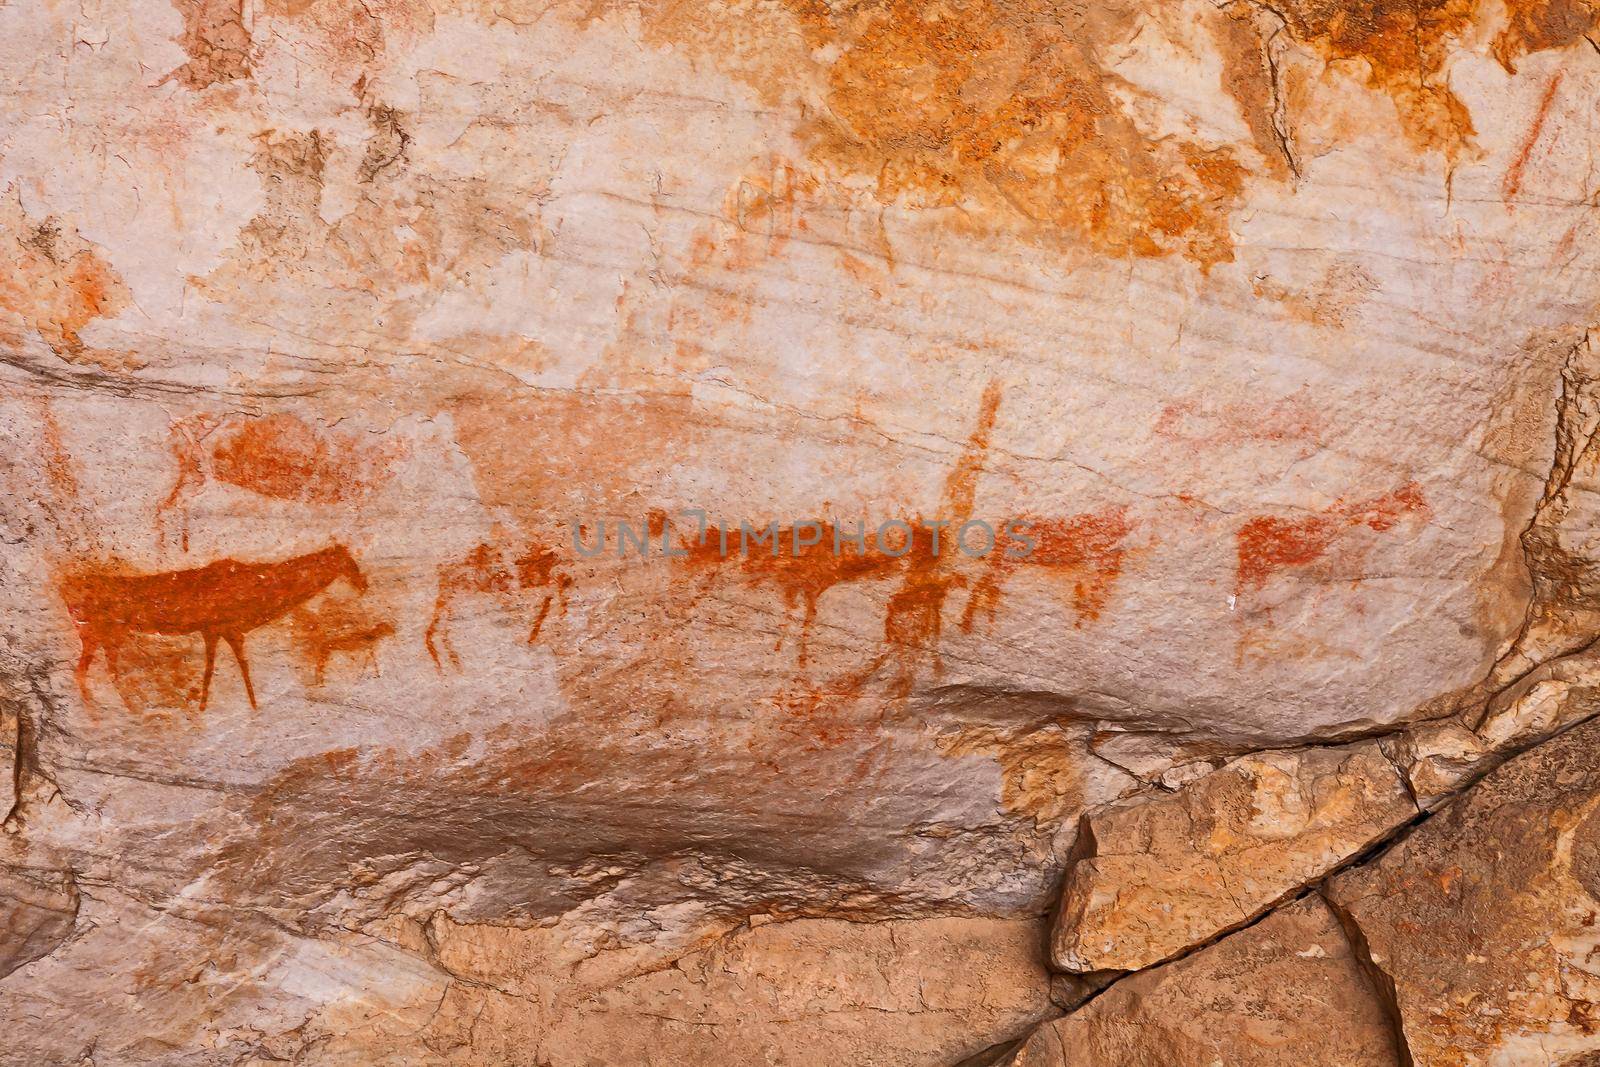 Badly eroded San rock art in the Cederberg Mountains in the Western Cape. South Africa